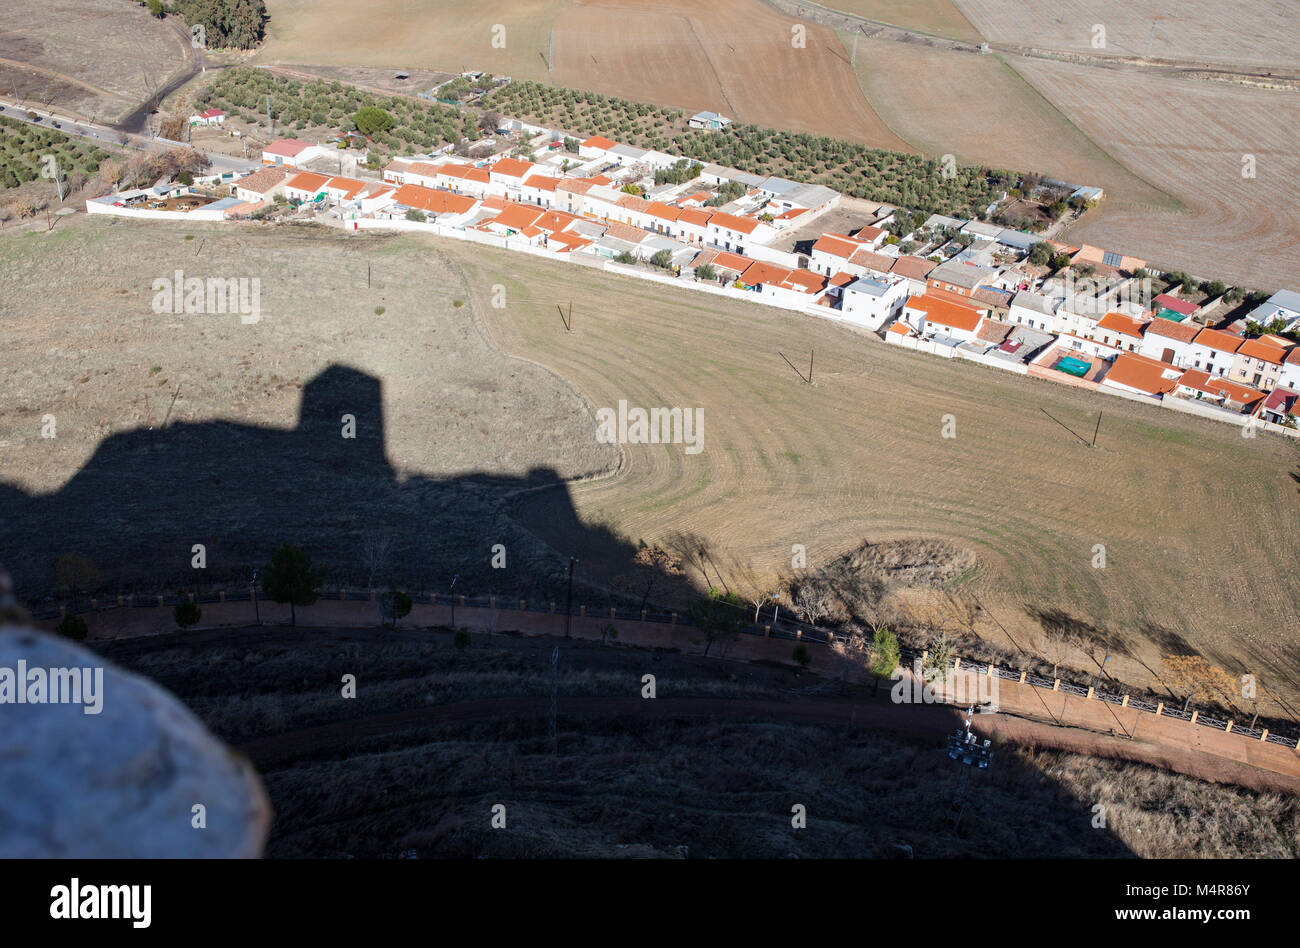 Castle of Belmez shadow getting close to town, Cordoba, Spain. Situated on the high rocky hill overlooking town of Belmez Stock Photo